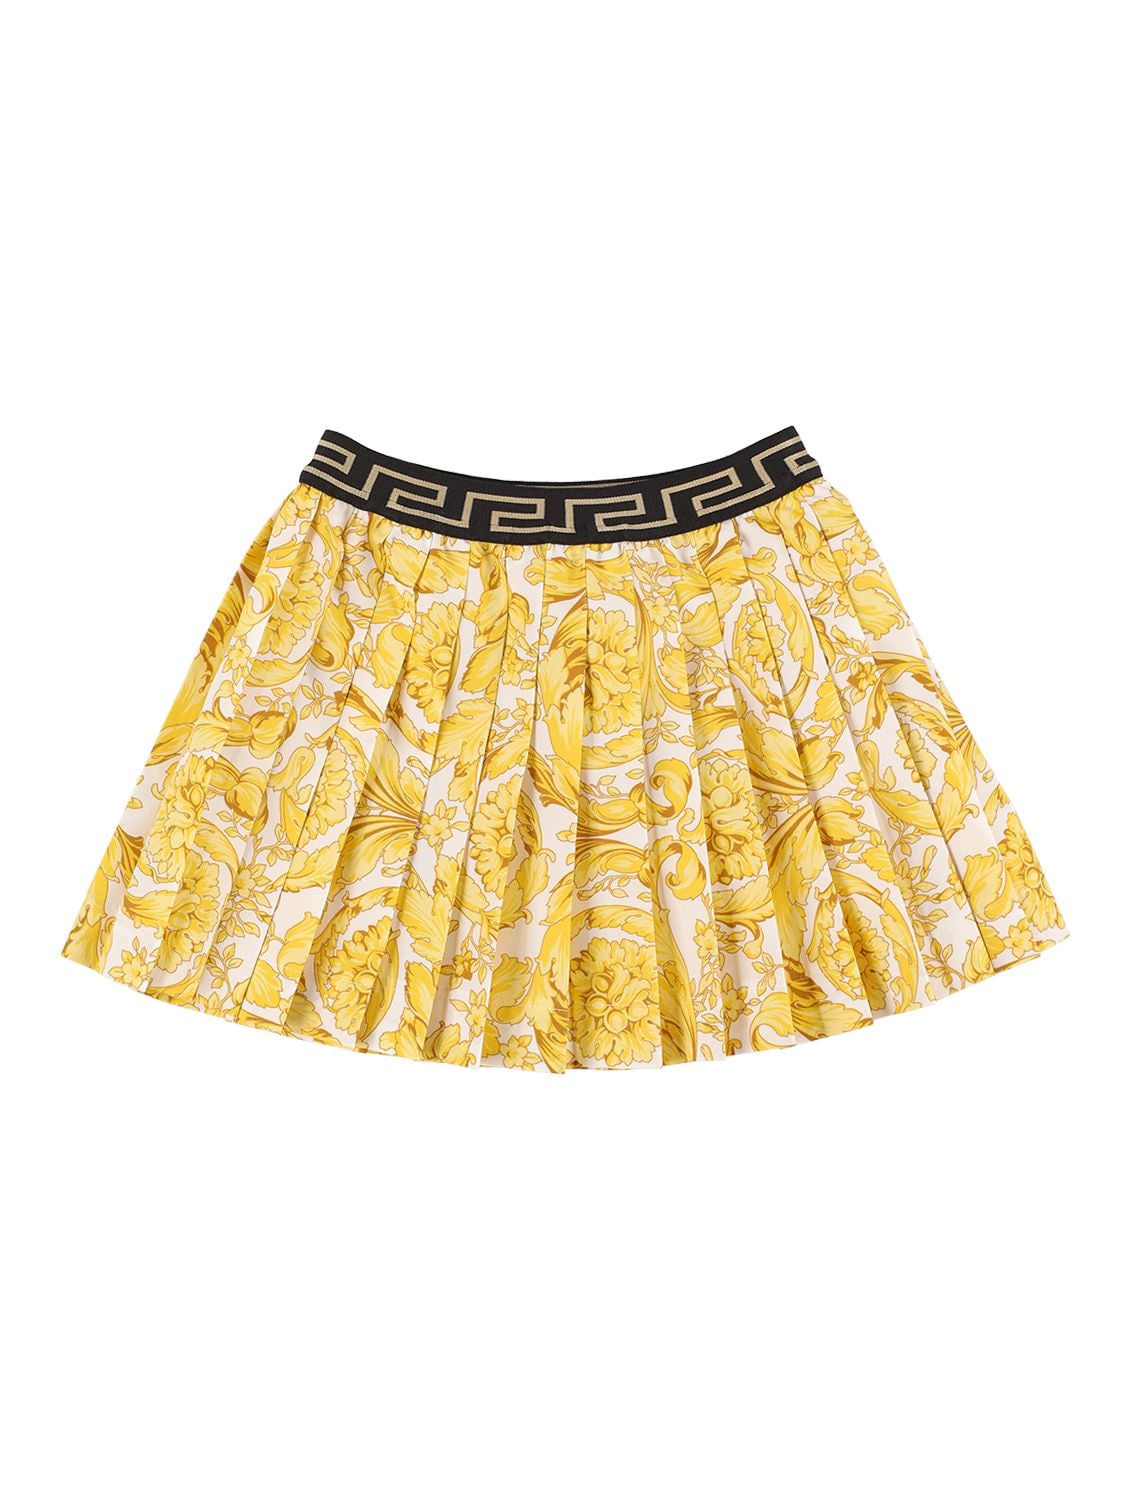 Versace Kids' Baroque Print Cotton Pleated Skirt In White,gold